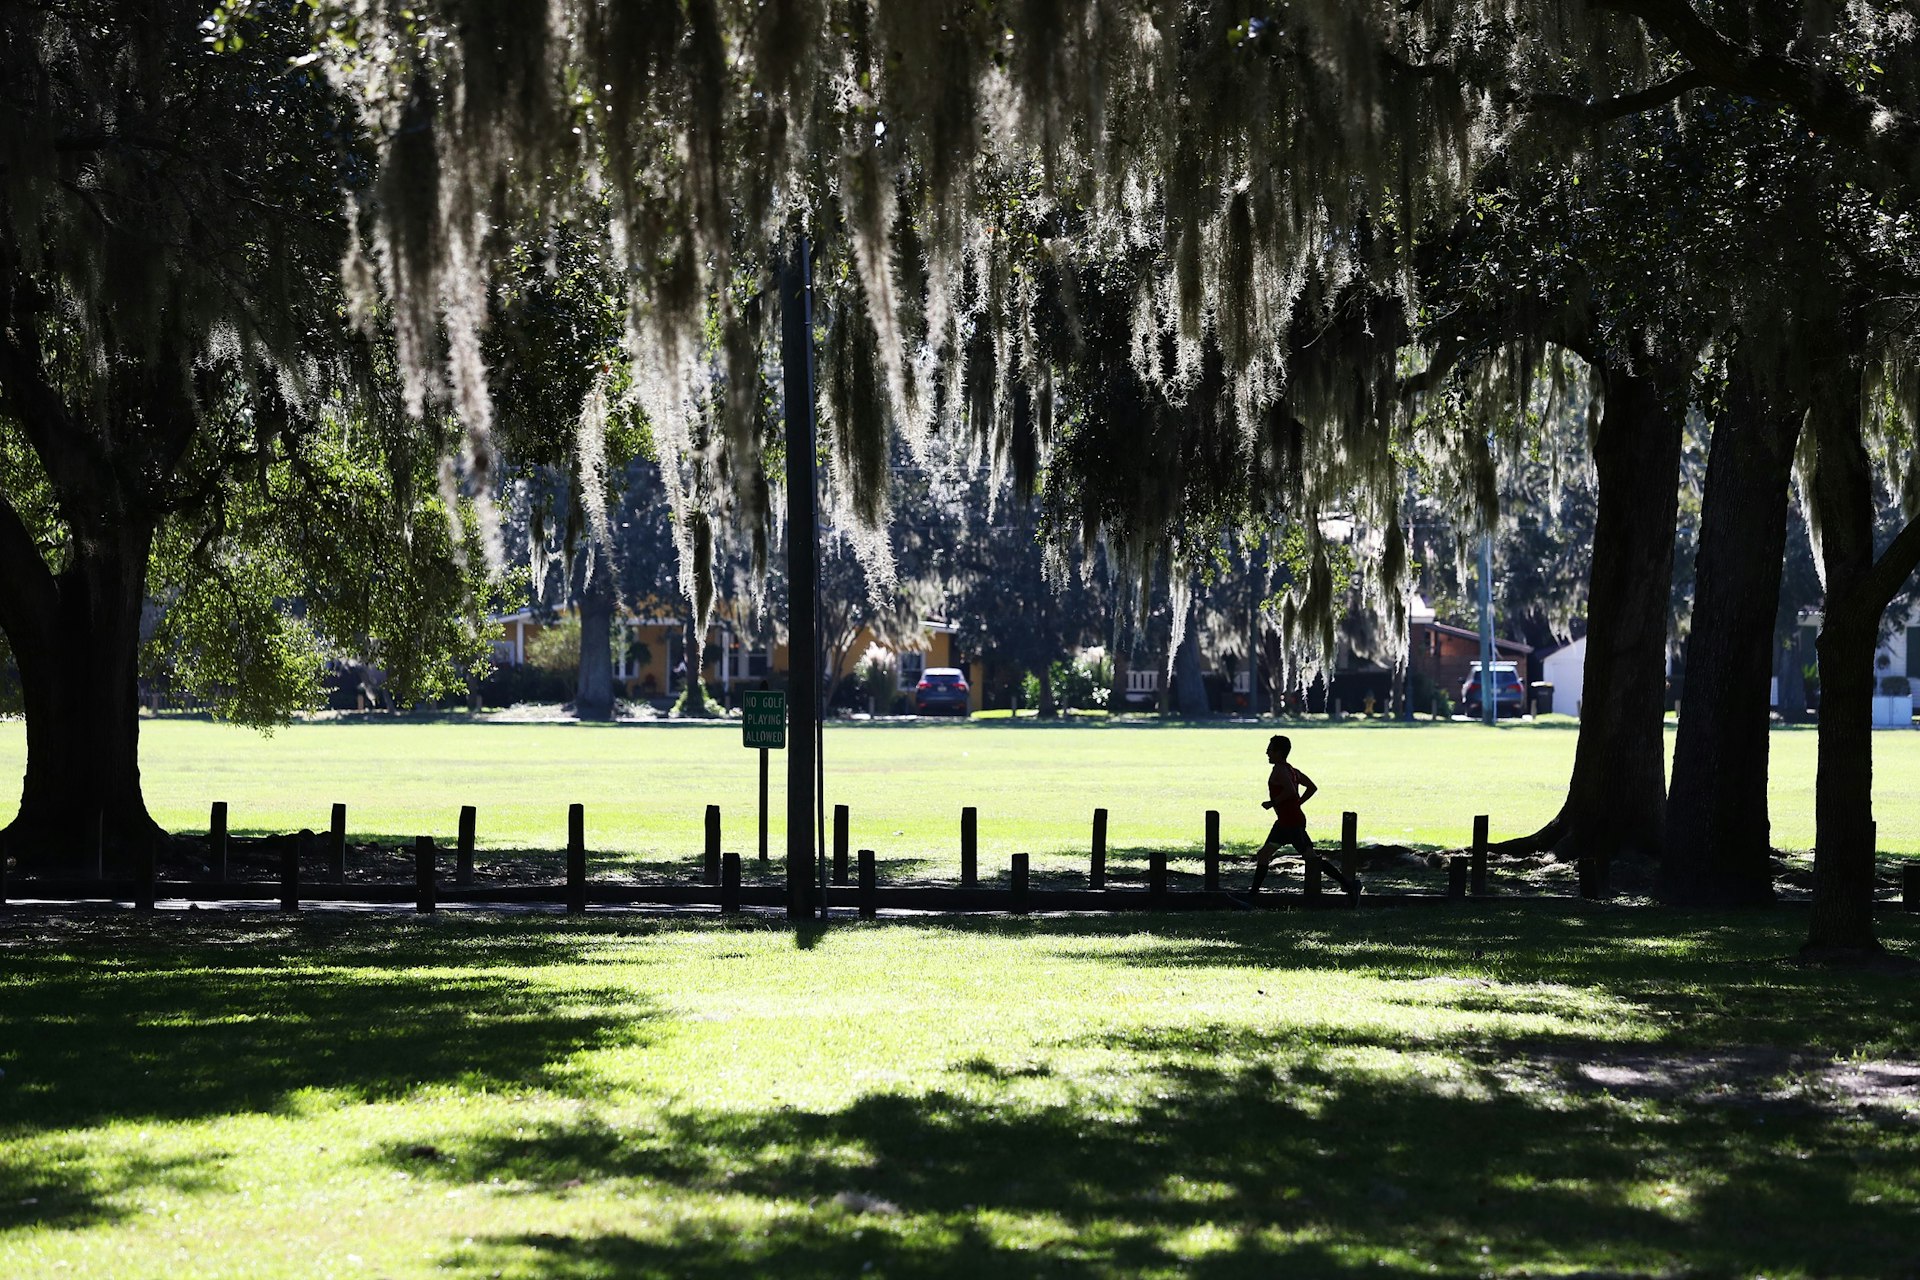 A runner makes his way past a park in Savannah, Georgia under the tree cover